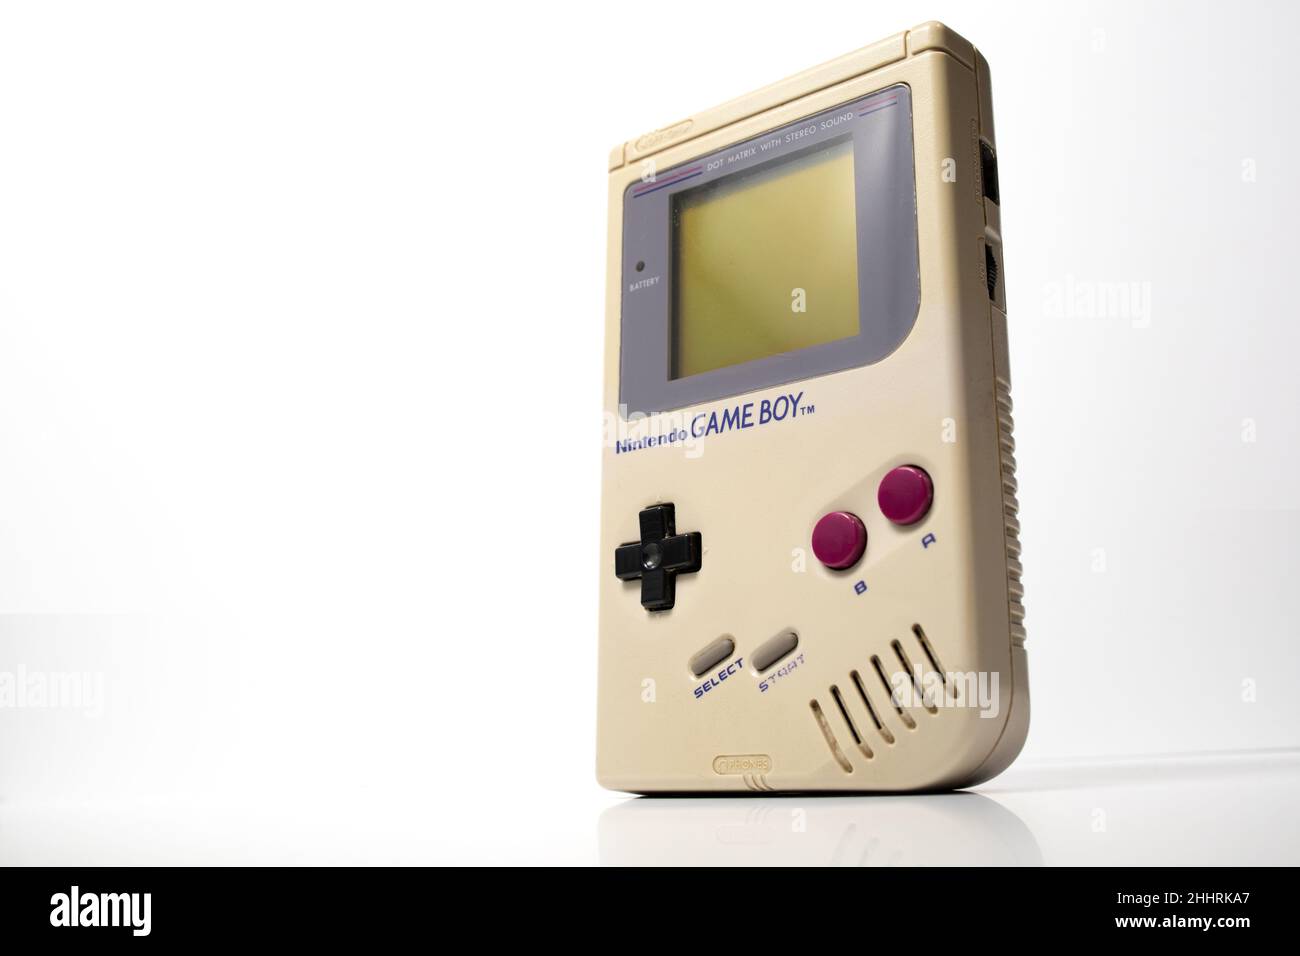 Schiedam, The Netherlands - OCT 4, 2020: Closeup of a vintage portable video game console on a white background. Stock Photo